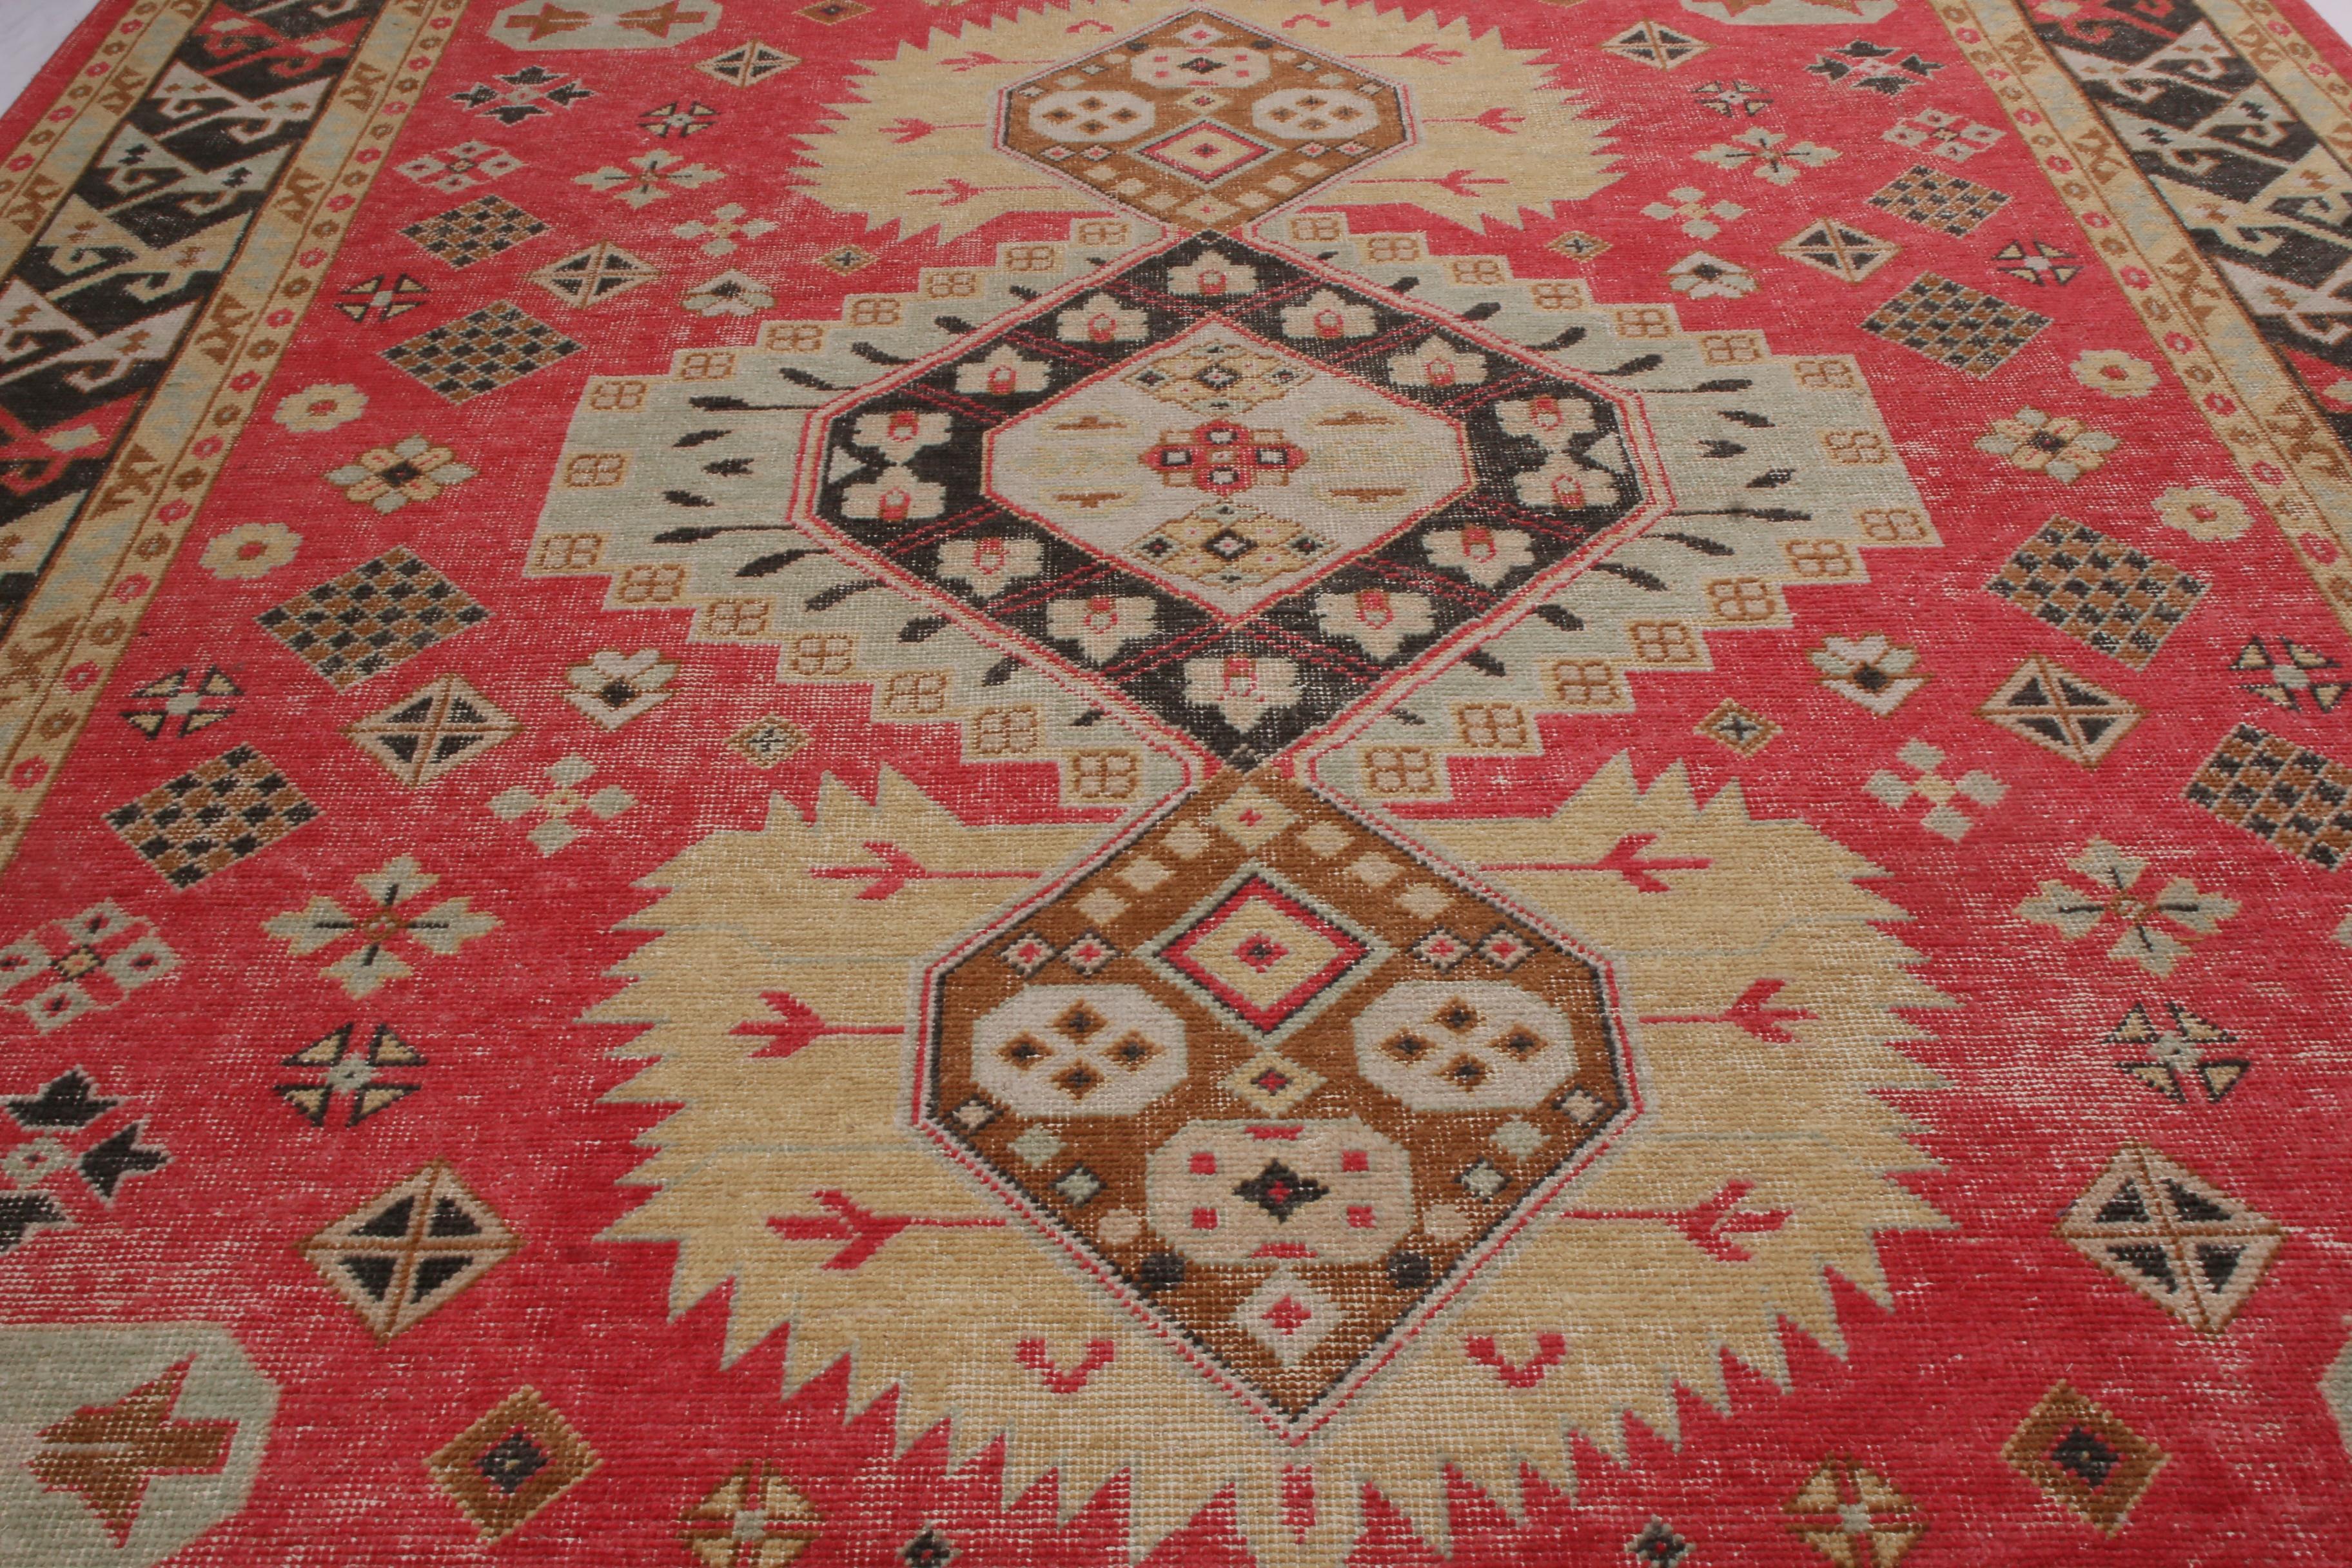 Tabriz Rug & Kilim's Red and Bright Gold Wool Rug from the Homage Collection